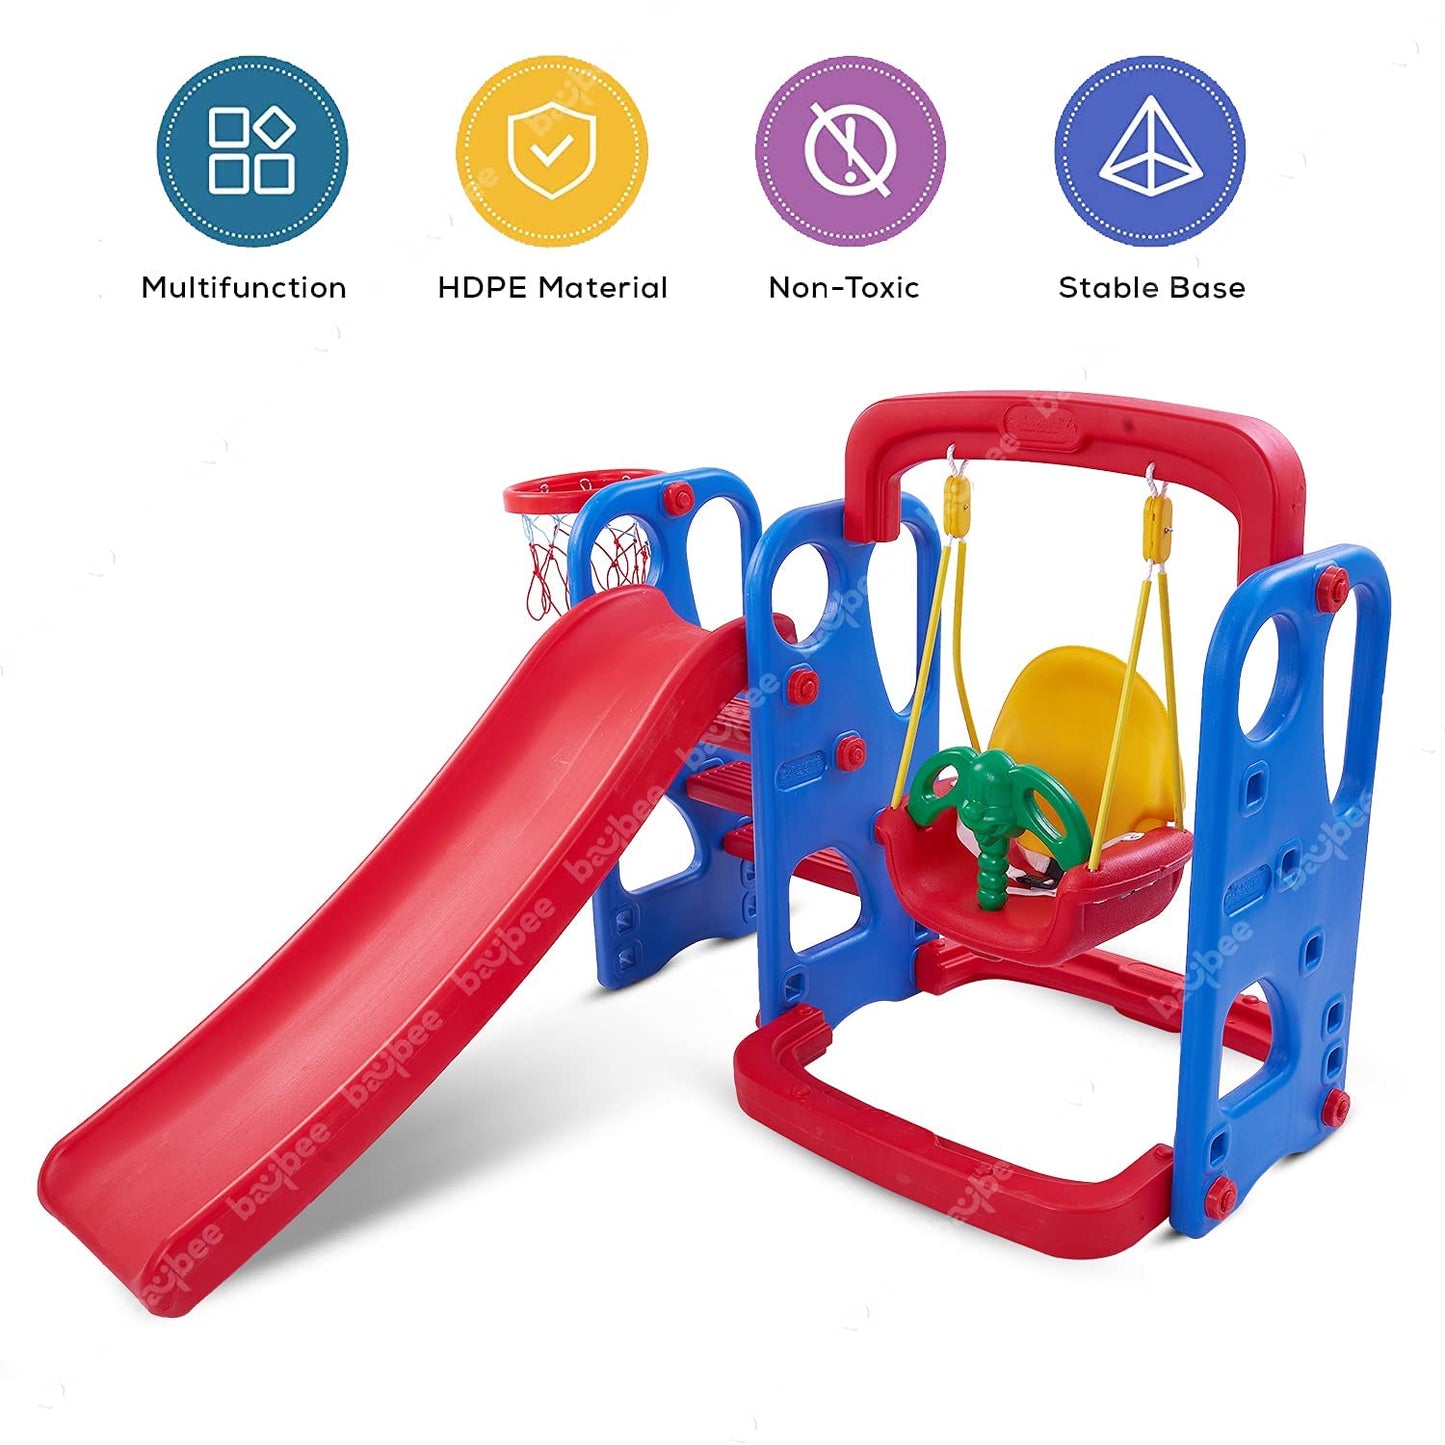 Baybee Super Garden Swing & Slider for Kids | Plastic Baby Slide and Swing Combo with 4 Inches Baby Basket Ball Toy for Home/Indoor/Outdoor